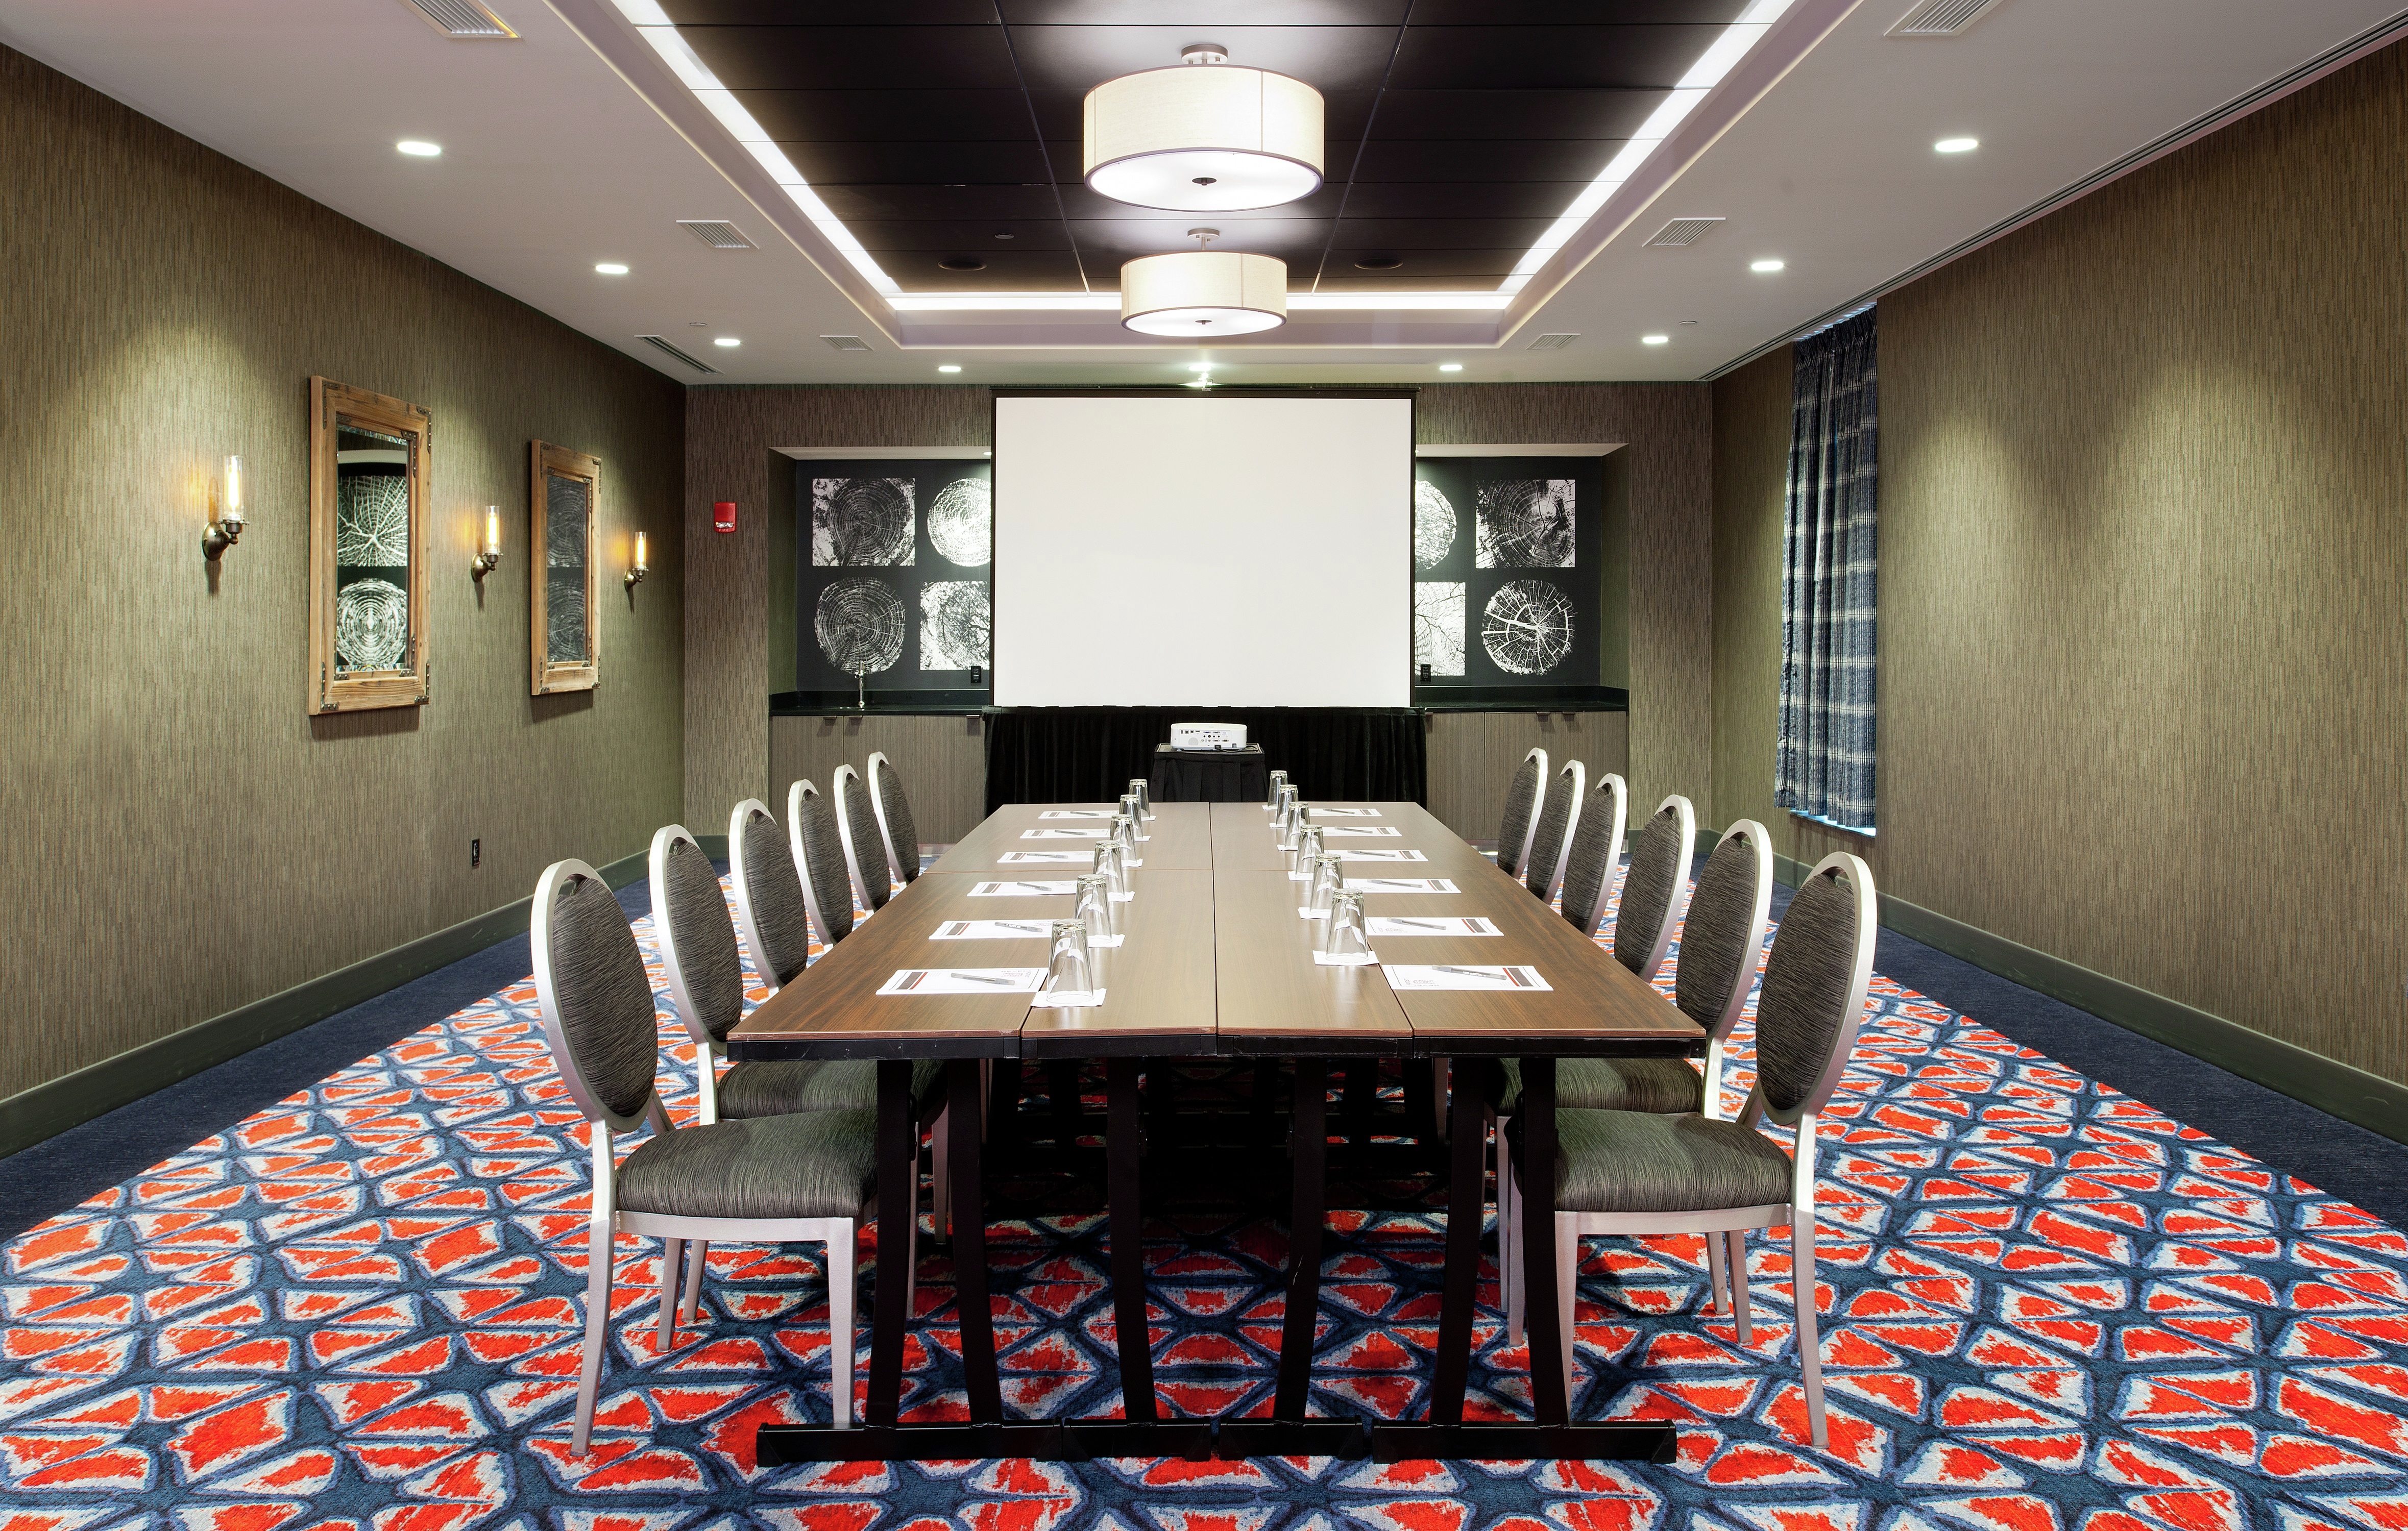 Seating for 12 at Large in Meeting Room With Presentation Screen and Wall Art